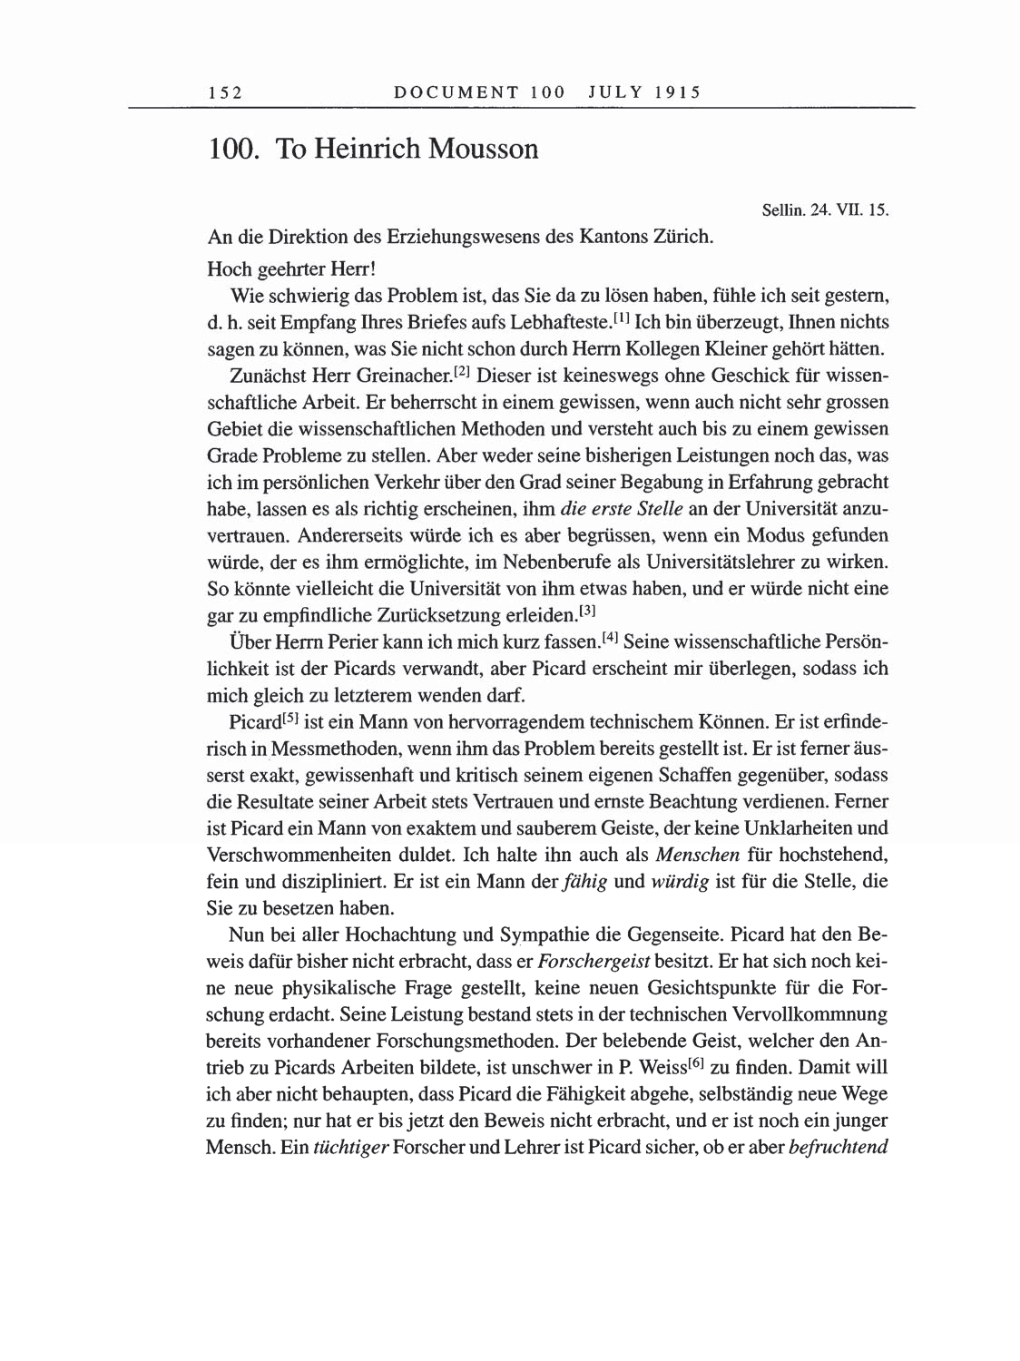 Volume 8, Part A: The Berlin Years: Correspondence 1914-1917 page 152